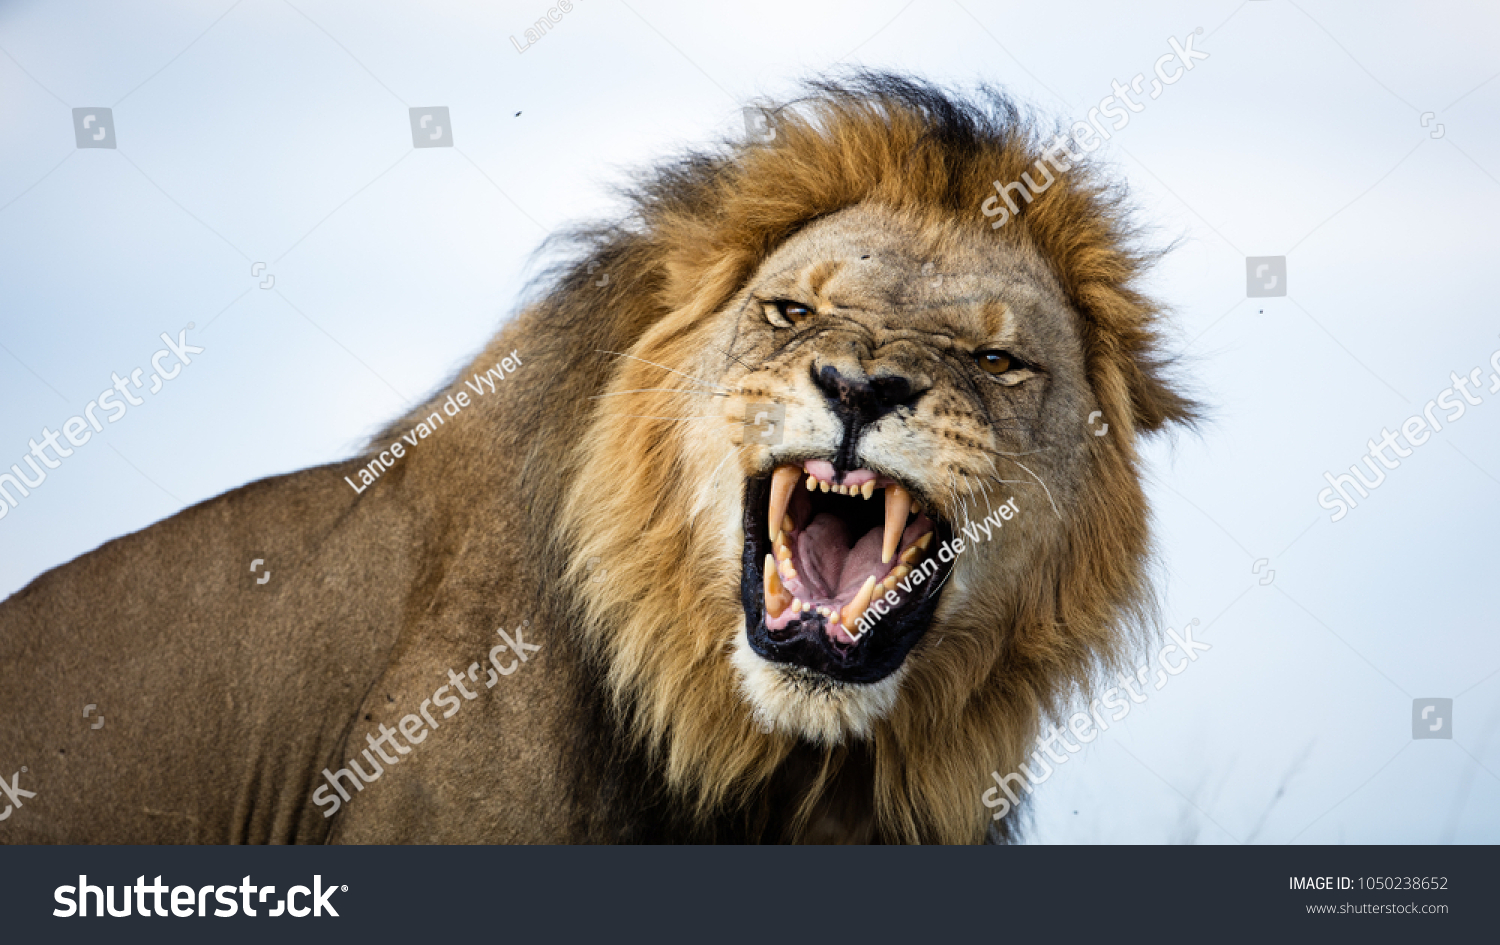 A lion snarls in our direction #1050238652